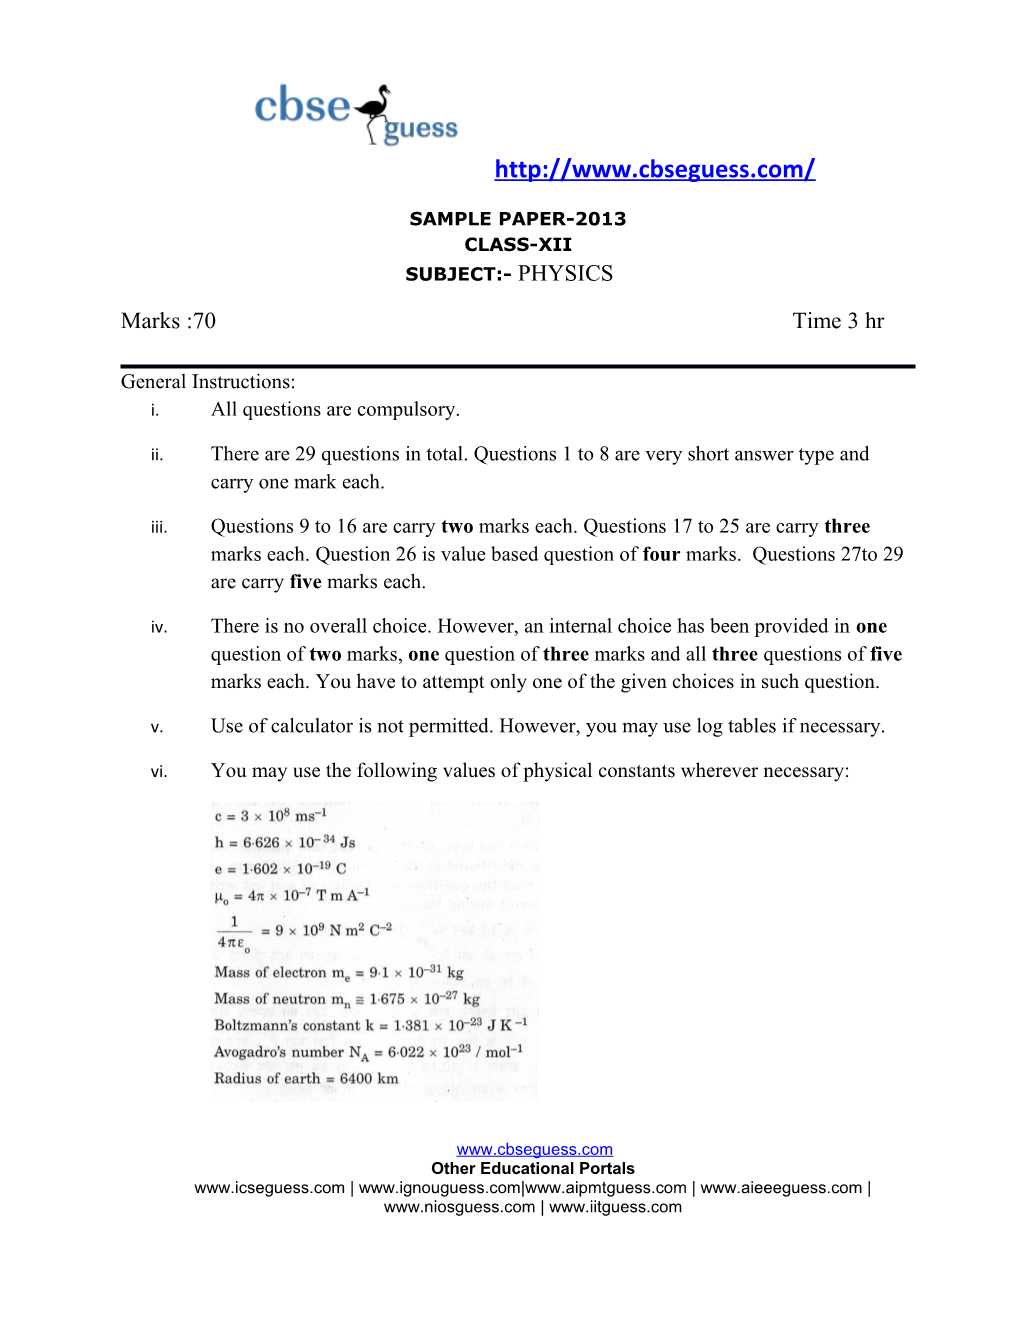 Sample Paper-2013 Class-Xii Subject:- Physics